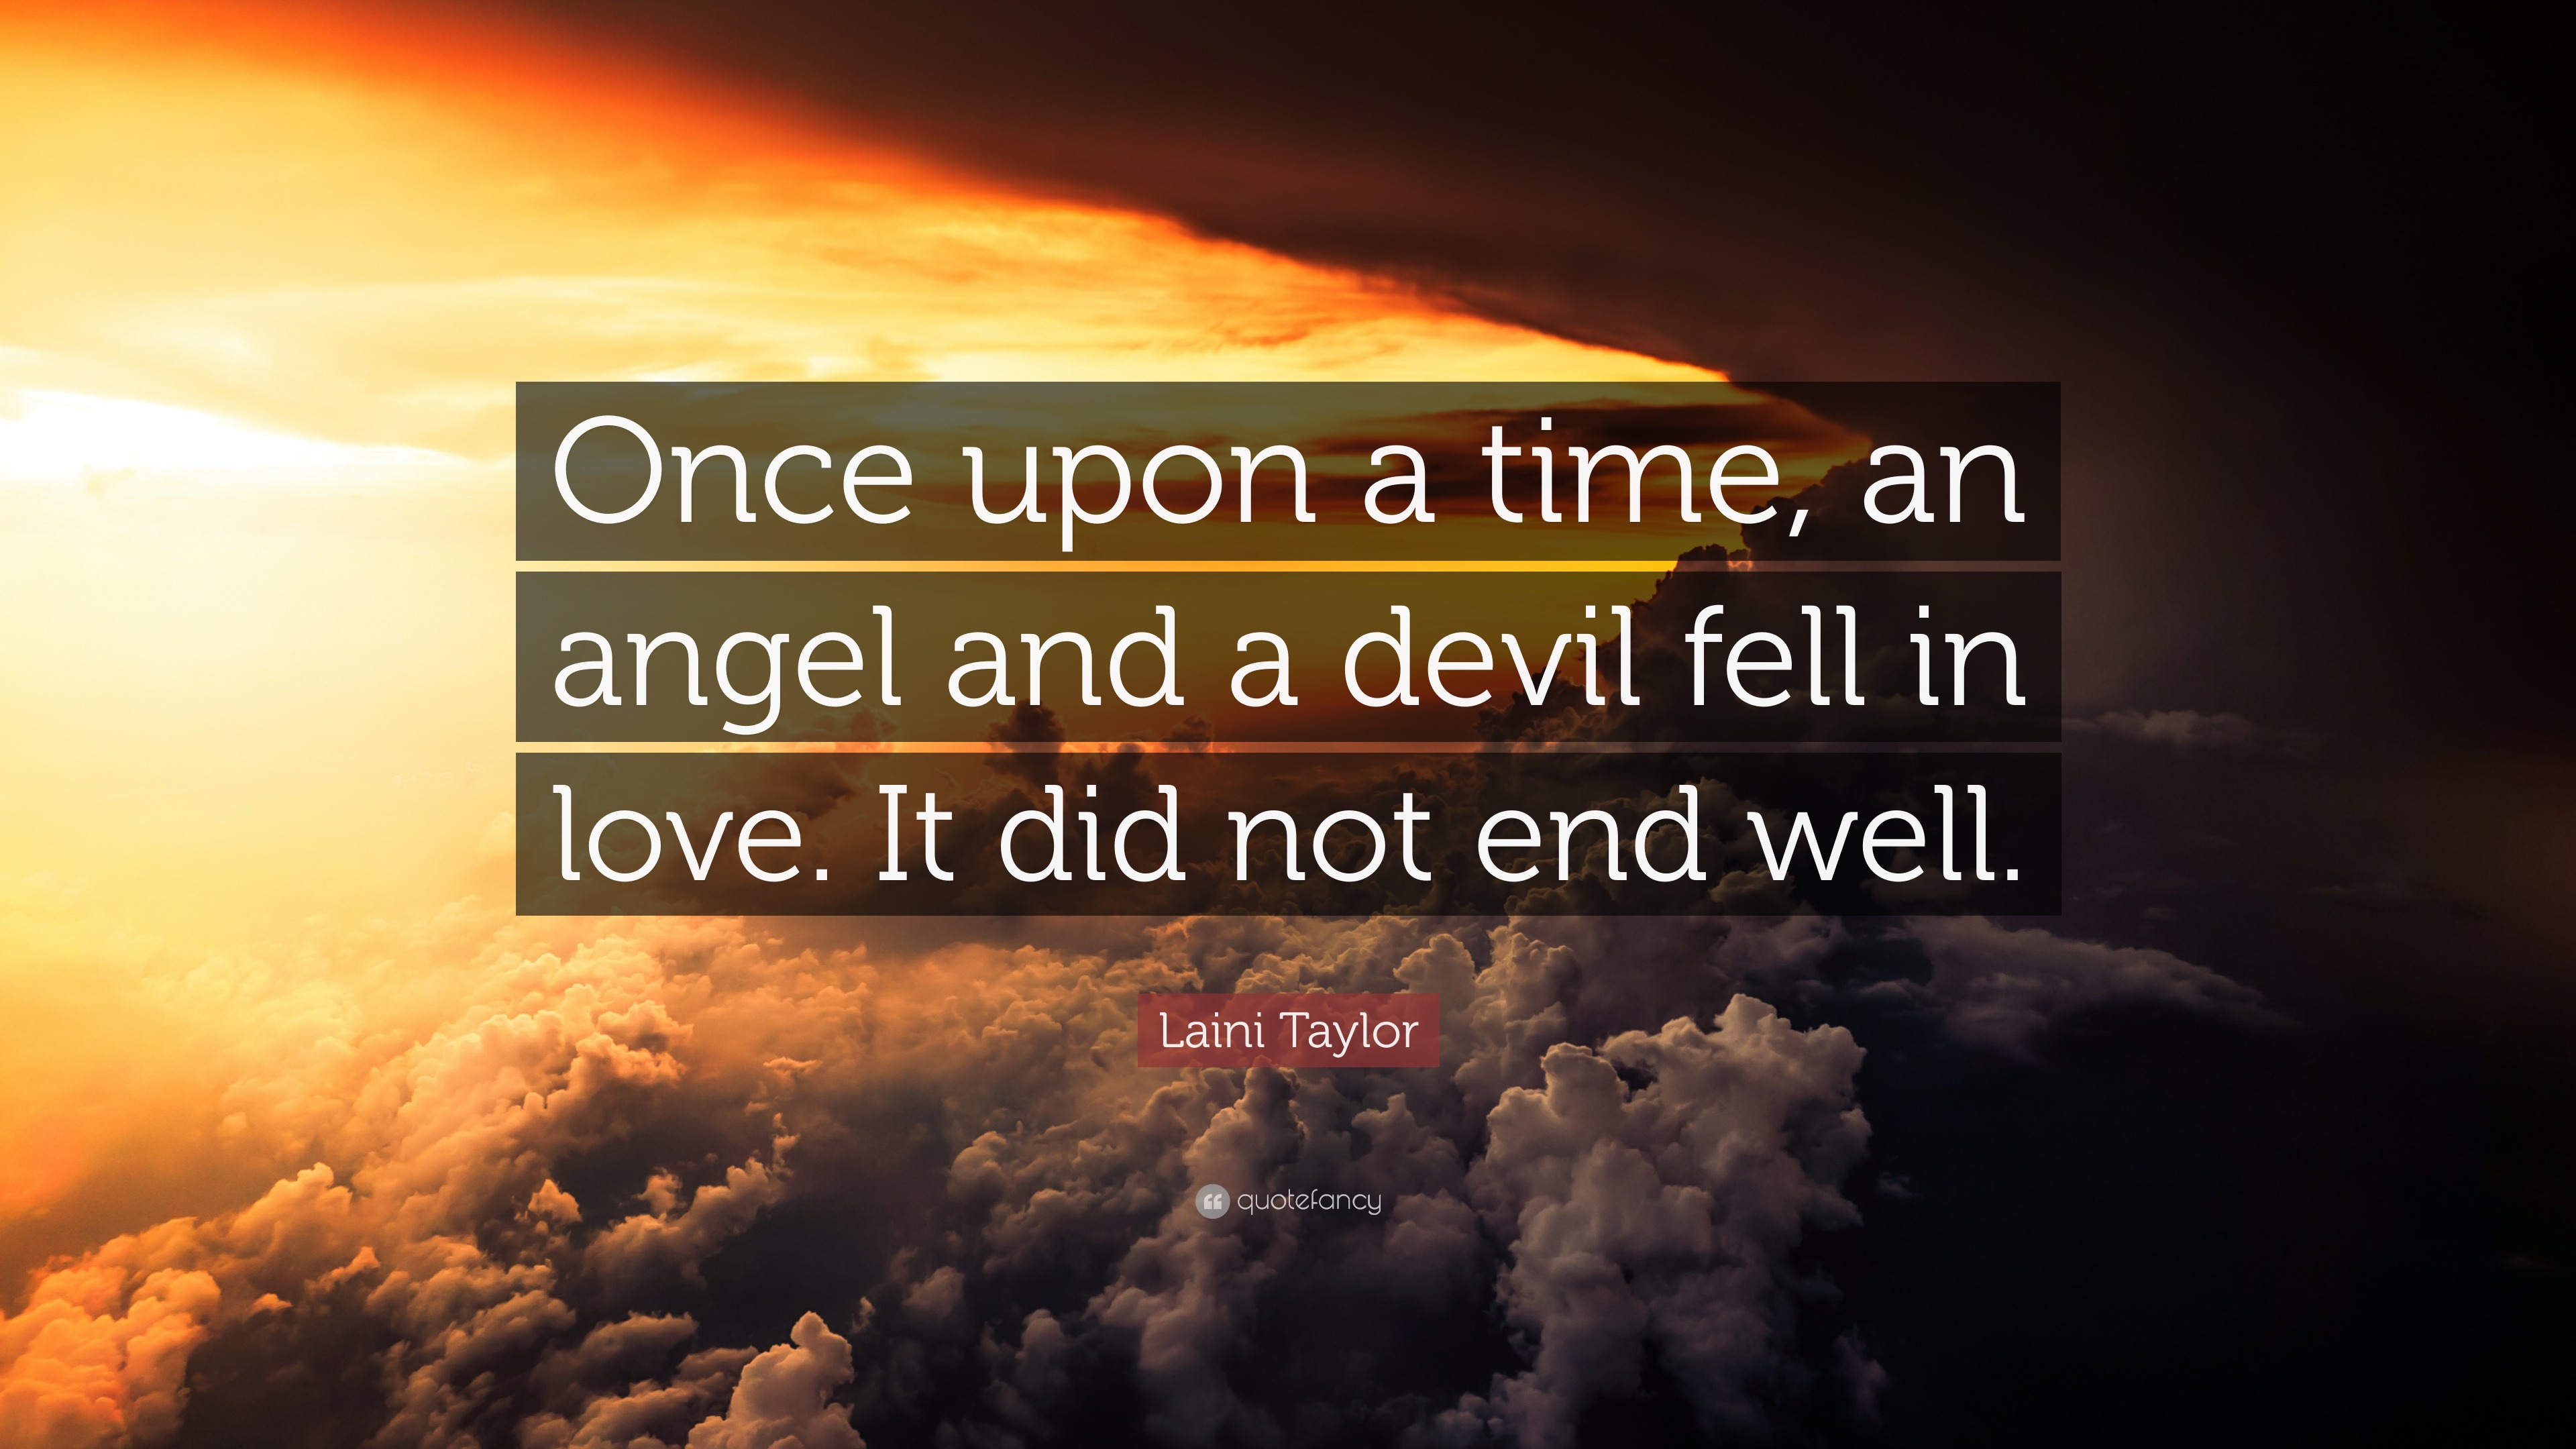 Laini Taylor Quote “ ce upon a time an angel and a devil fell